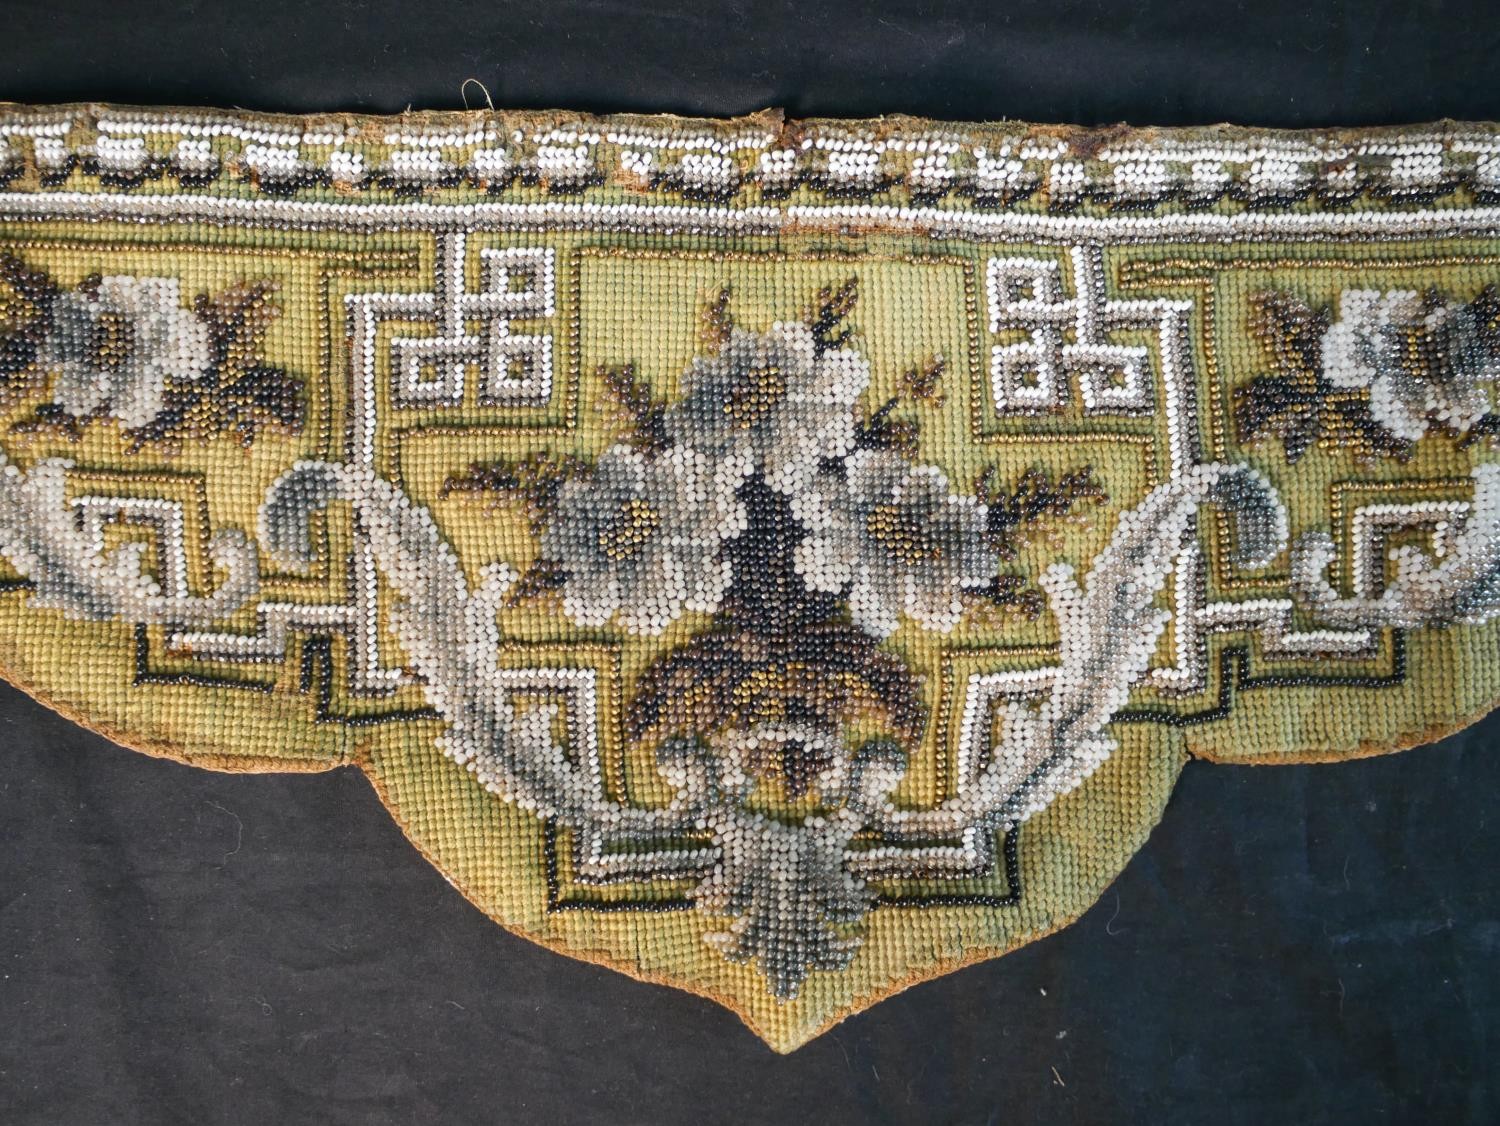 Two 19th century beadwork panels with floral and foliate design along with a gilt metal expandable - Image 5 of 6